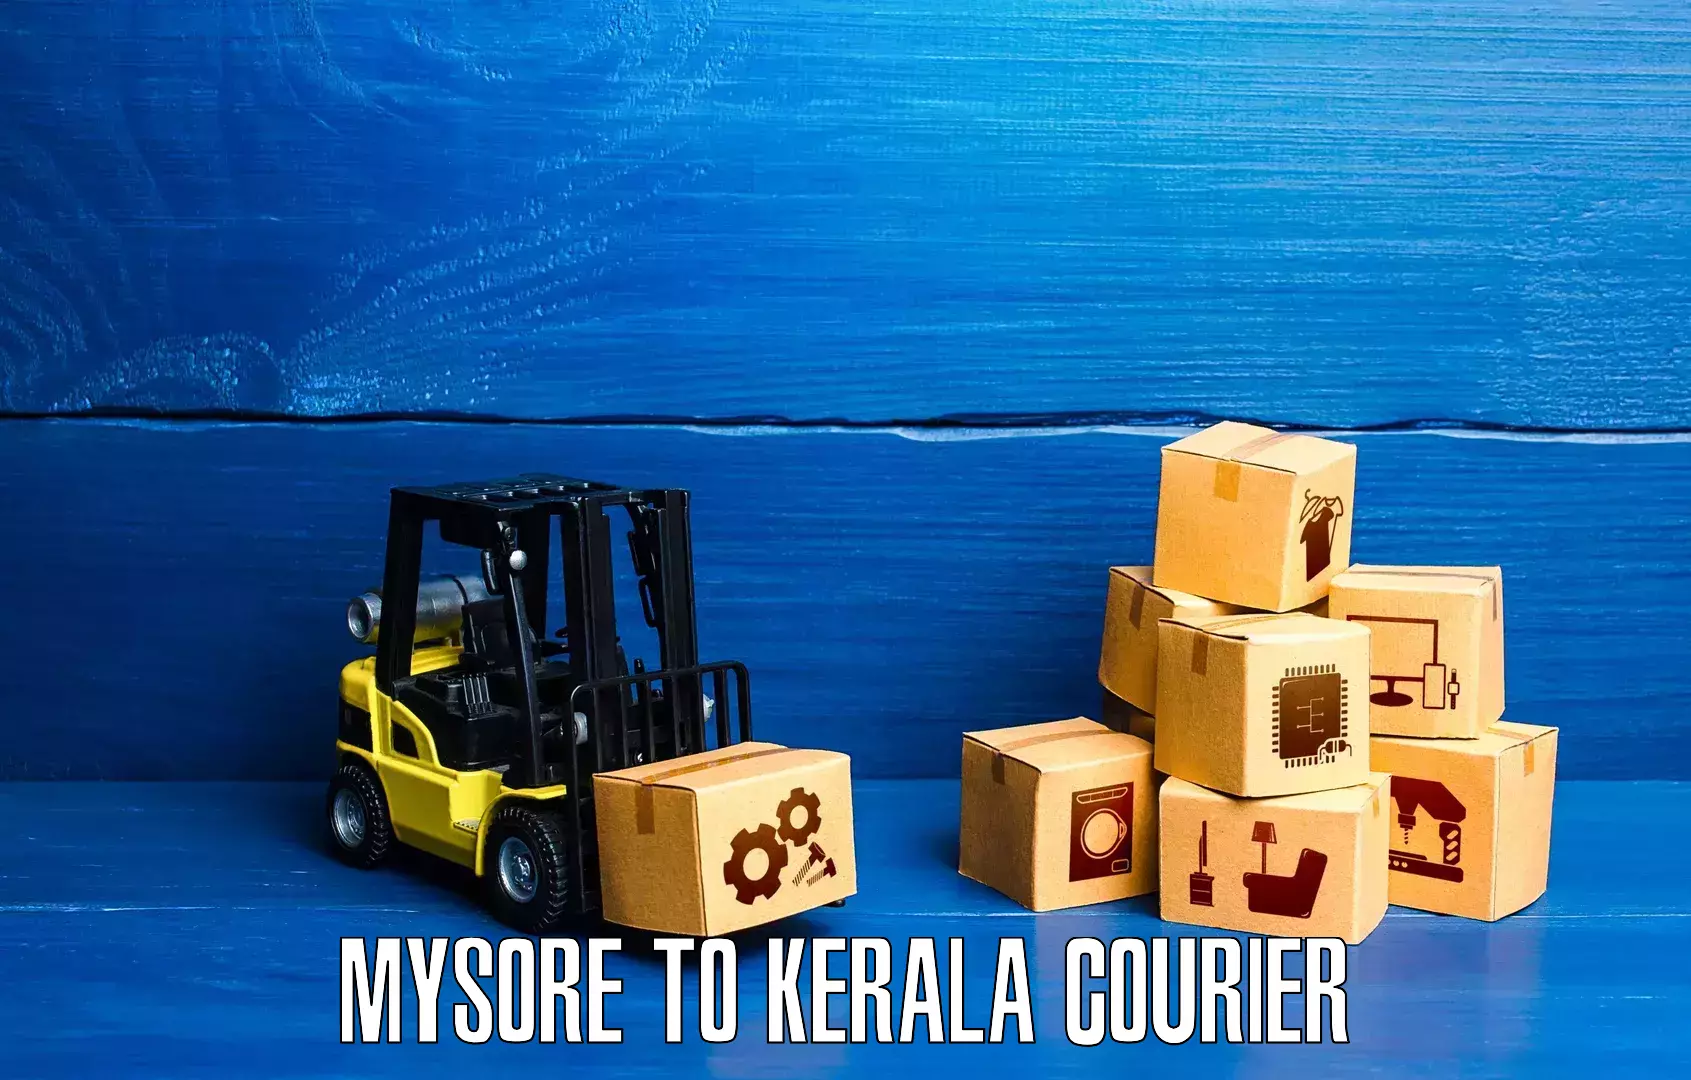 Smart shipping technology in Mysore to Cochin University of Science and Technology